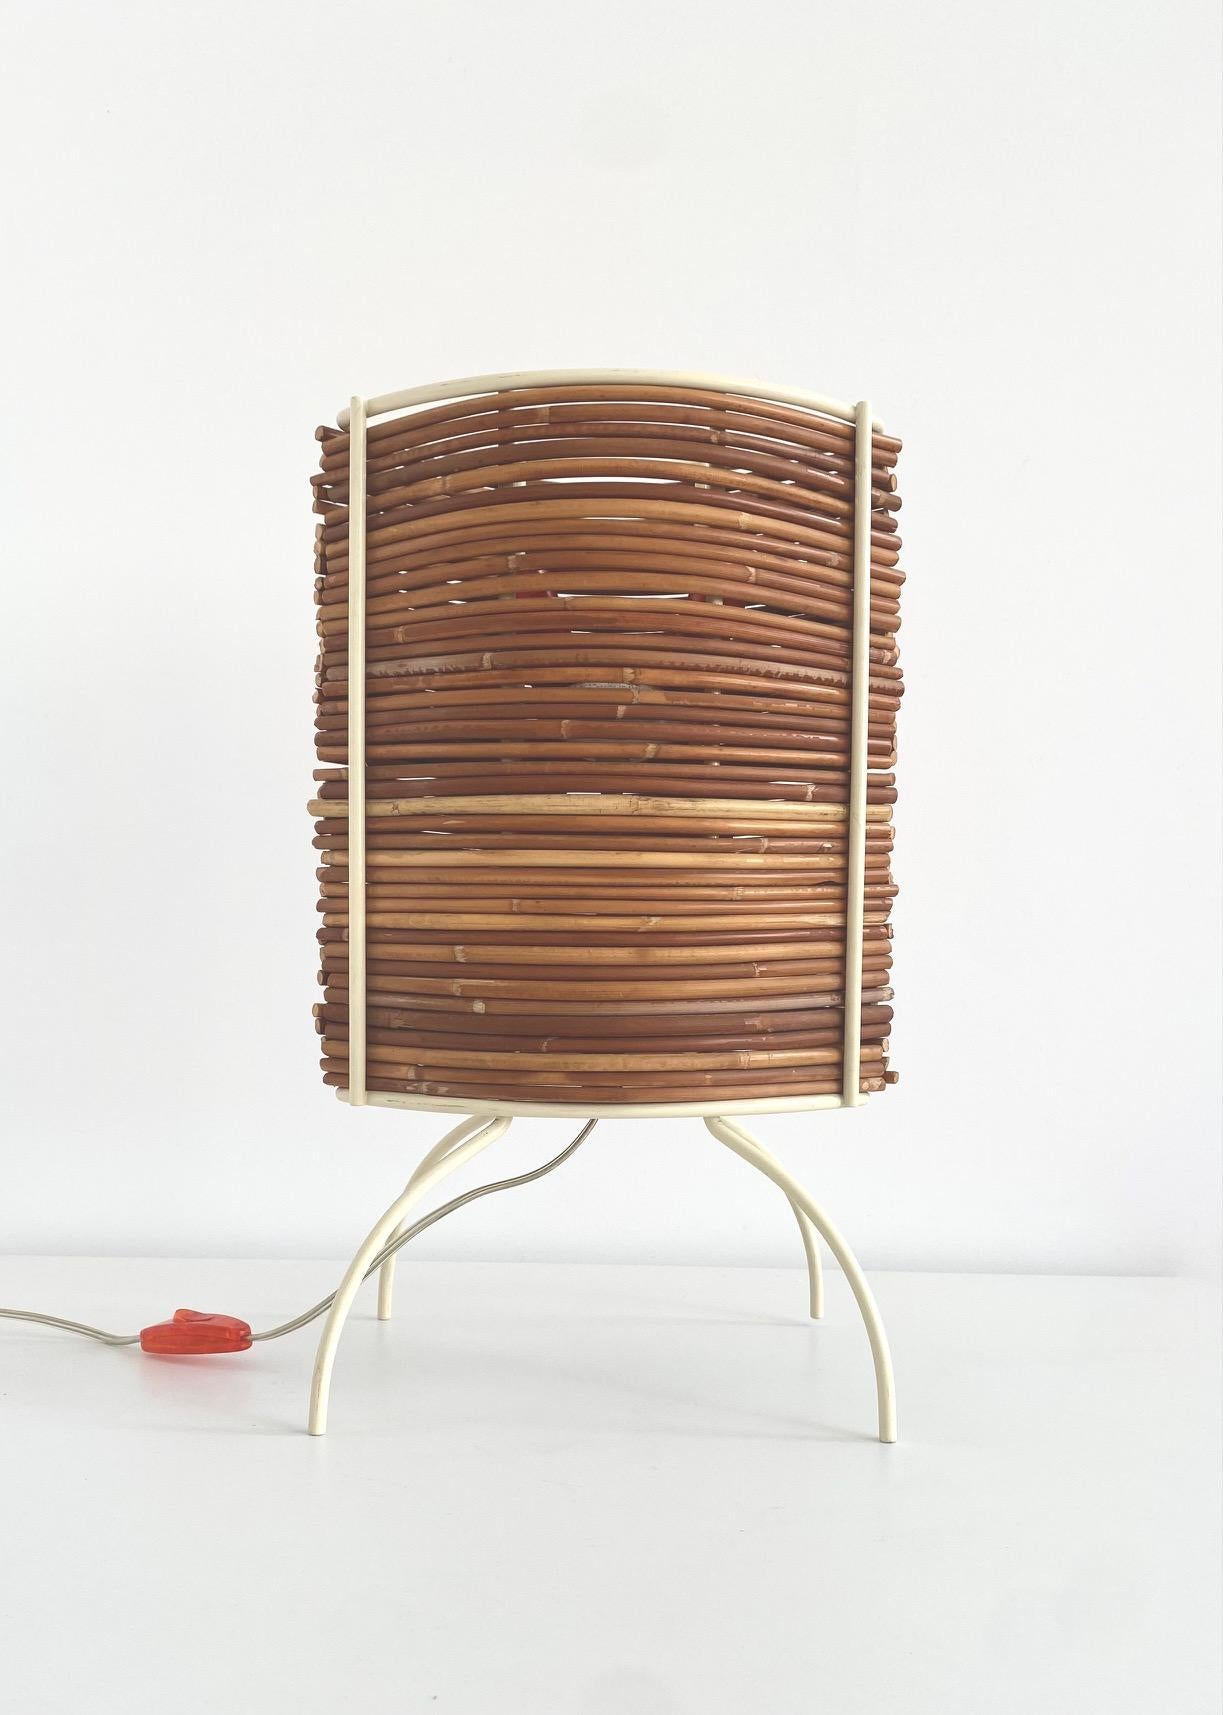 Lamp model Bambù Humberto (1953) & Fernando (1962) CAMPANA with beige lacquered metal structure in which bamboo rods are inserted which form diffusing screens for the four light sources.
Edition: Fontana Arte from 2000 to 2005
Measures: H 45 cm, W